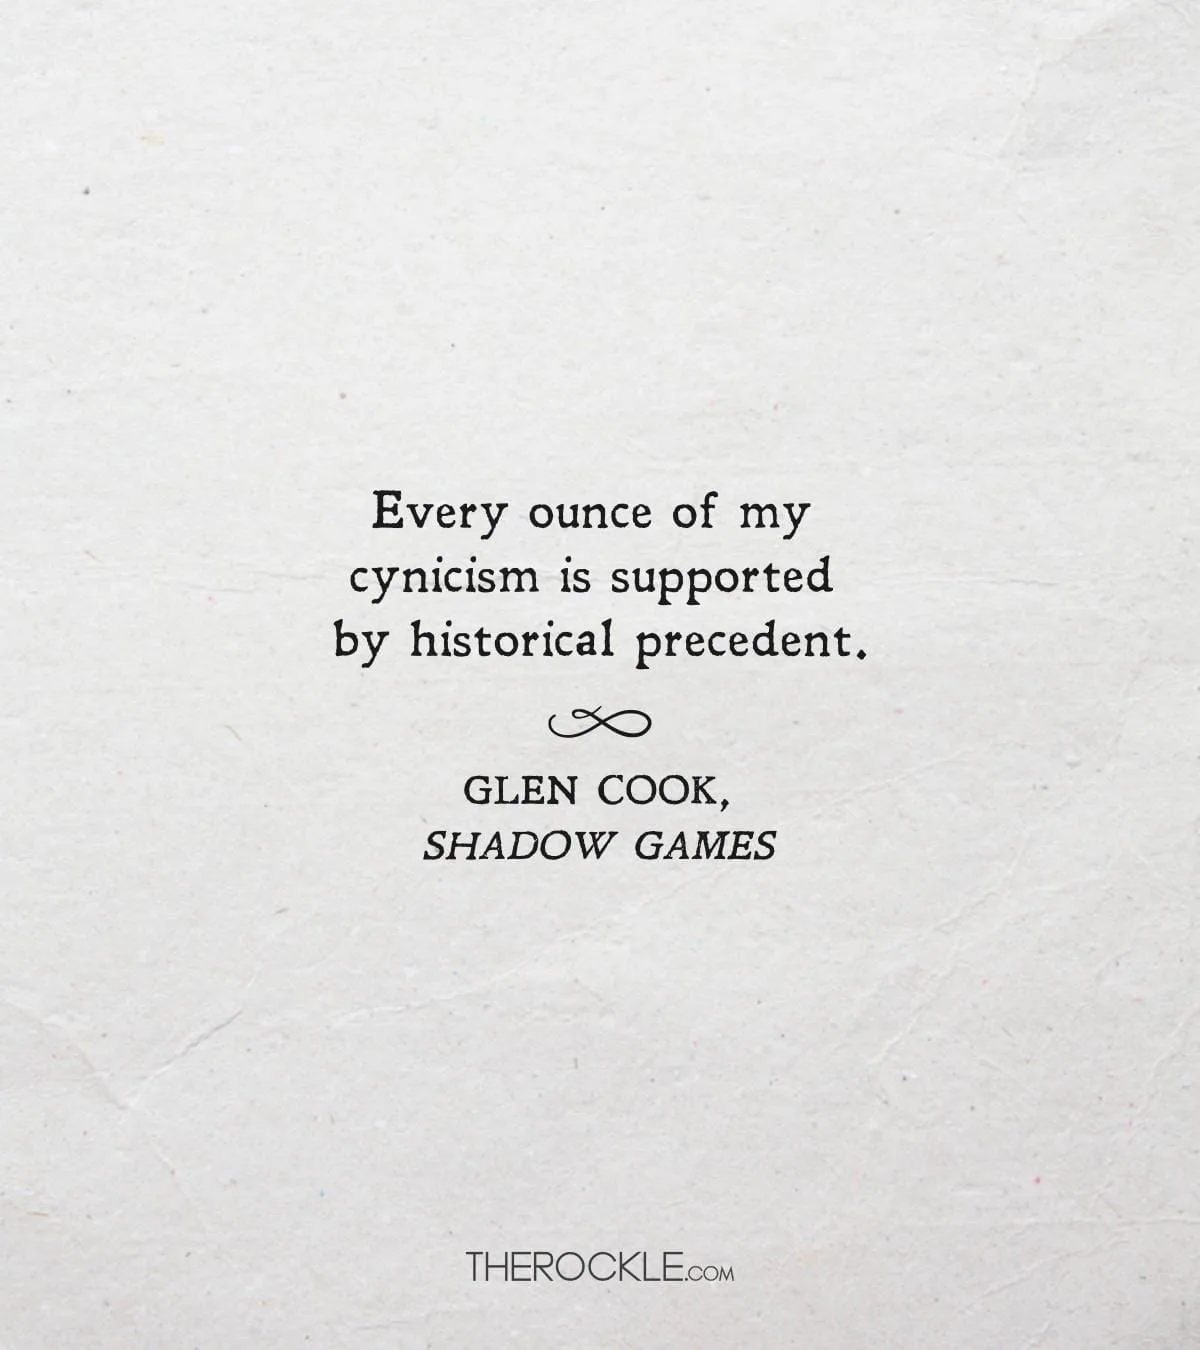 Quote from Glen Cook's Shadow Games